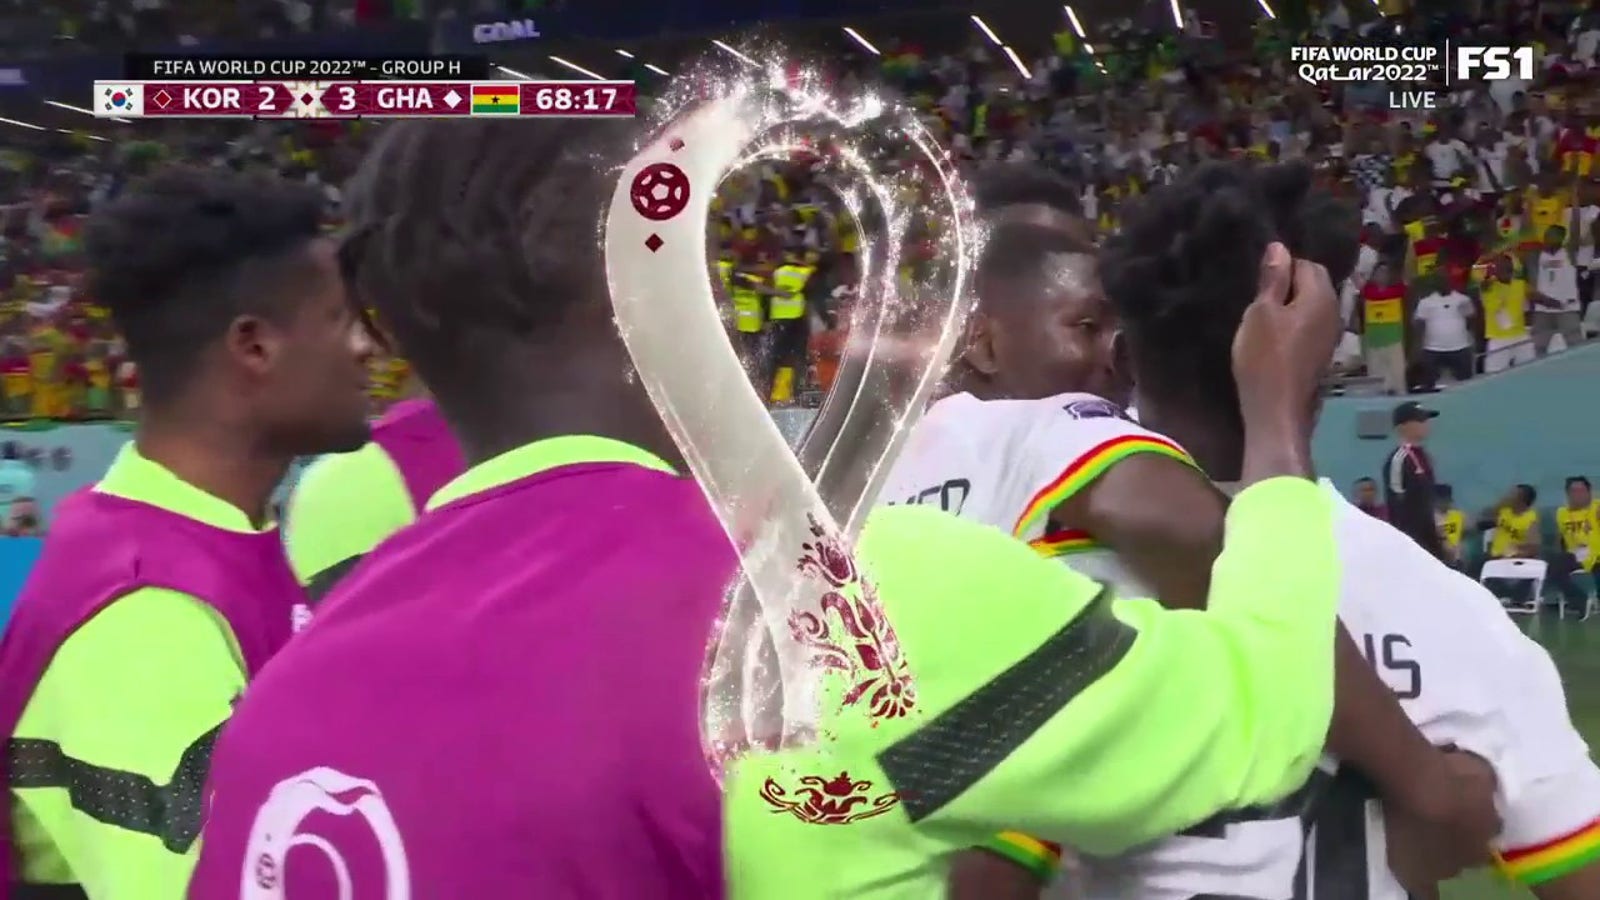 Ghana's Mohammed Kudus scored against Korea in the 68th minute |  World Cup 2022